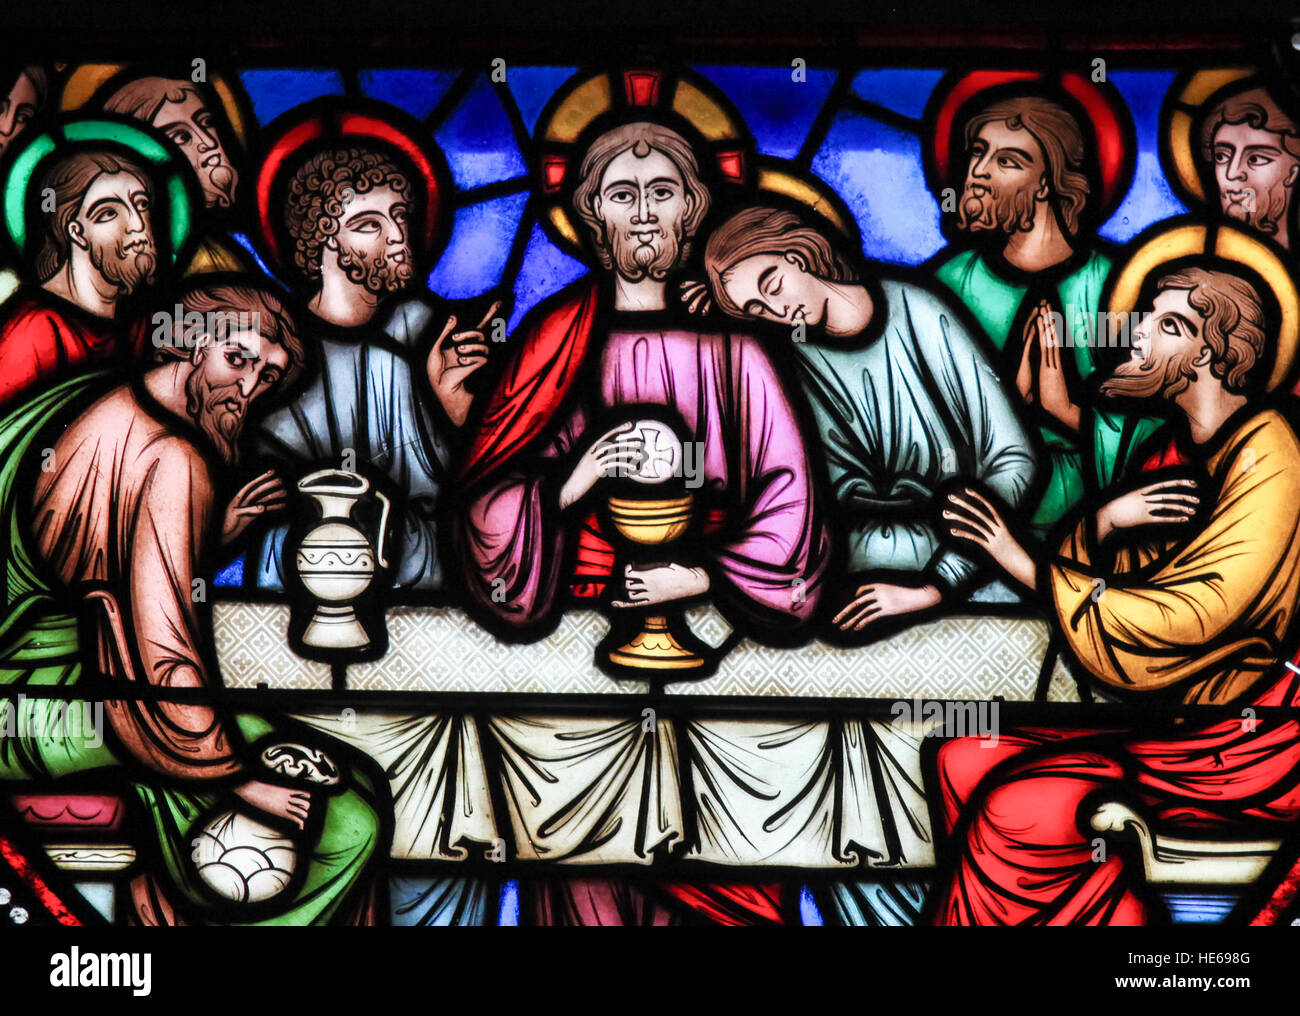 Stained glass window depicting Jesus and the twelve apostles on maundy thursday at the Last Supper in the cathedral of Brussels, Belgium. Stock Photo